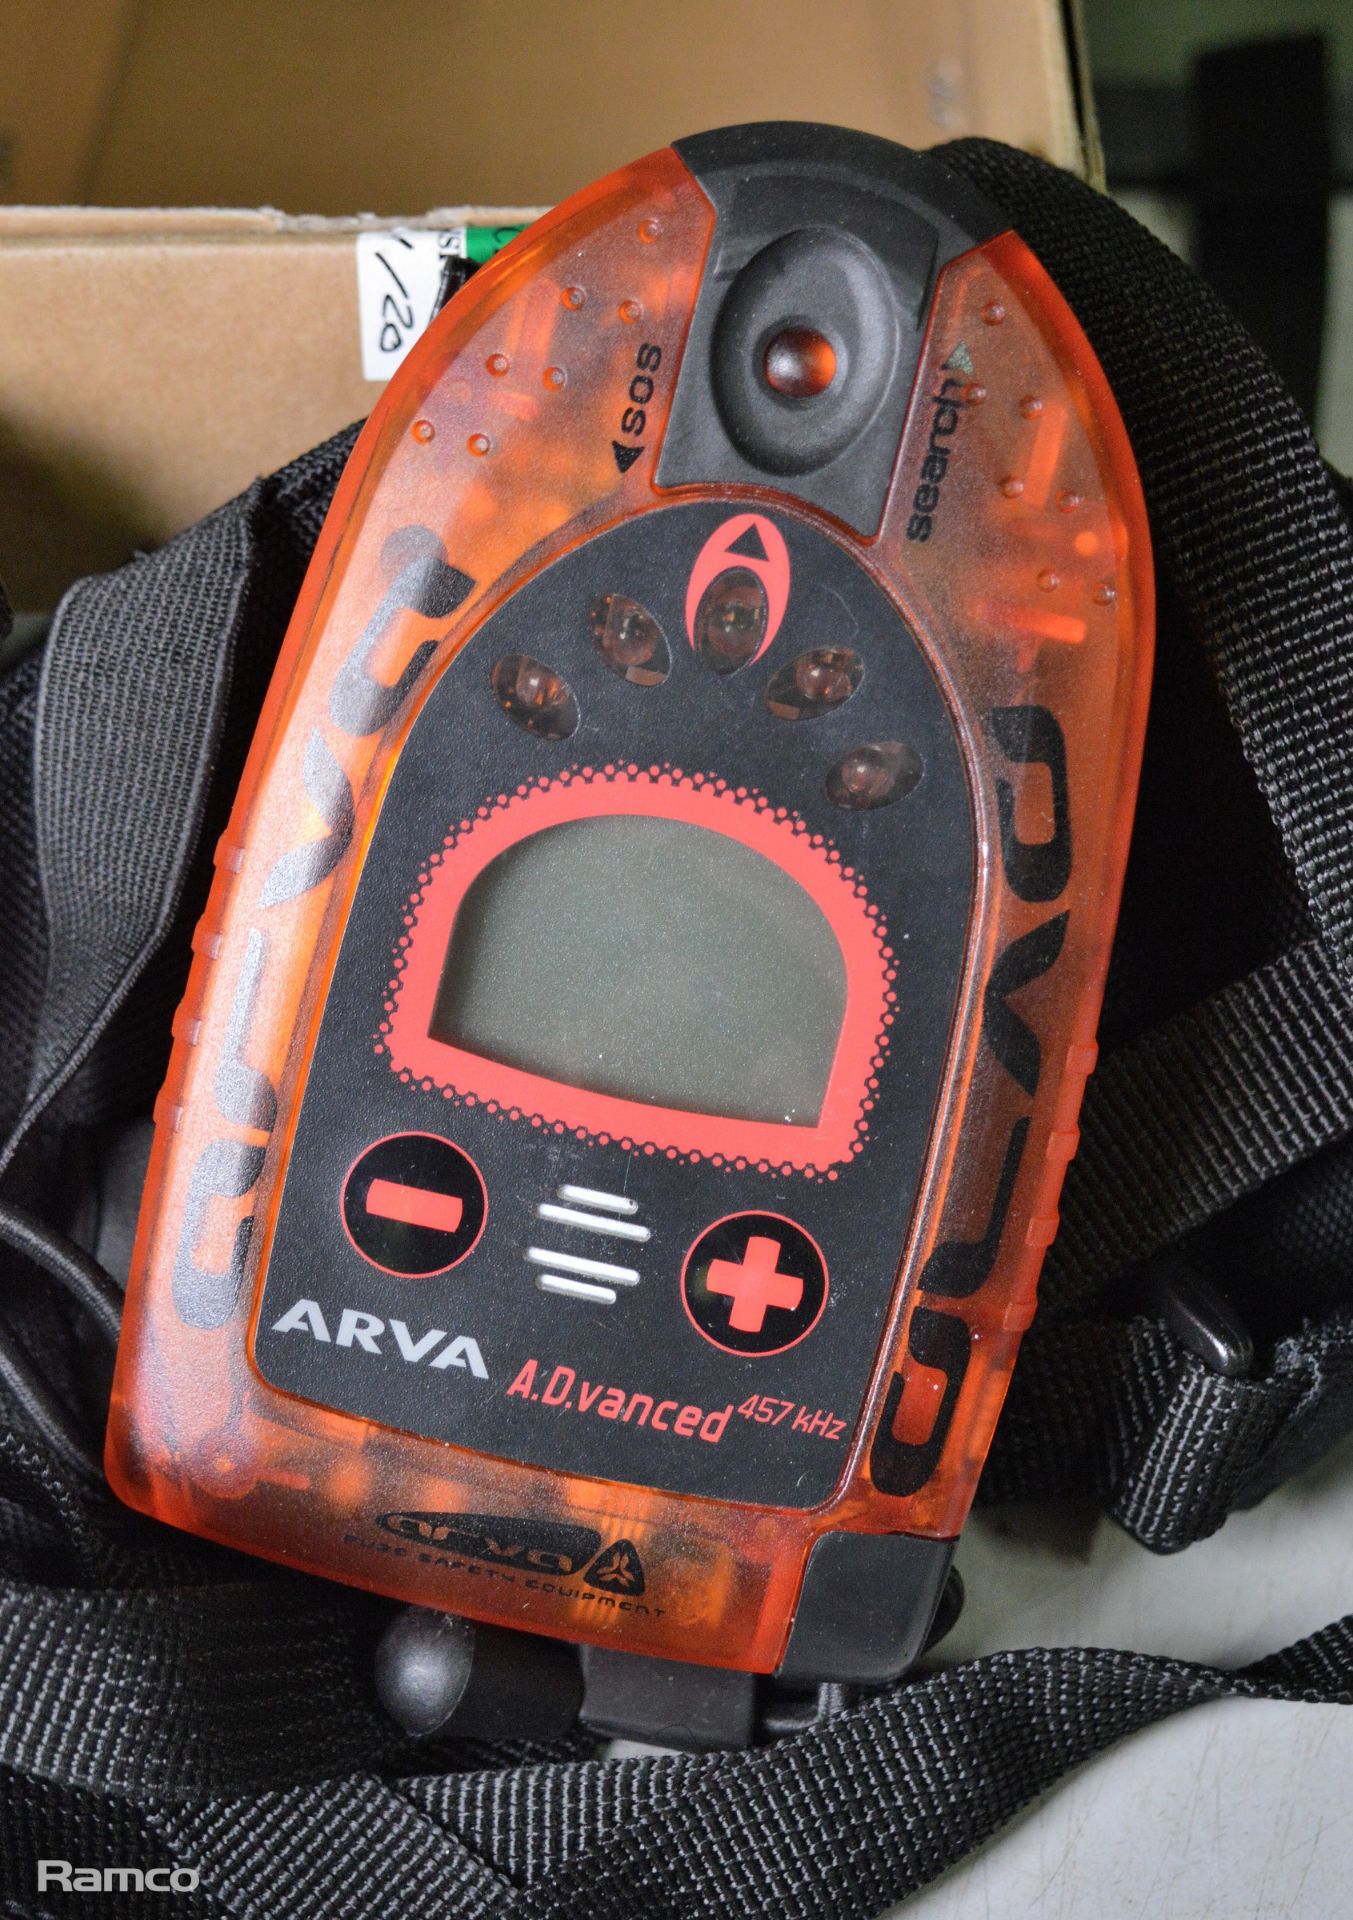 2x Arva Advanced Avalanche Transceivers 457mhz - Image 2 of 2